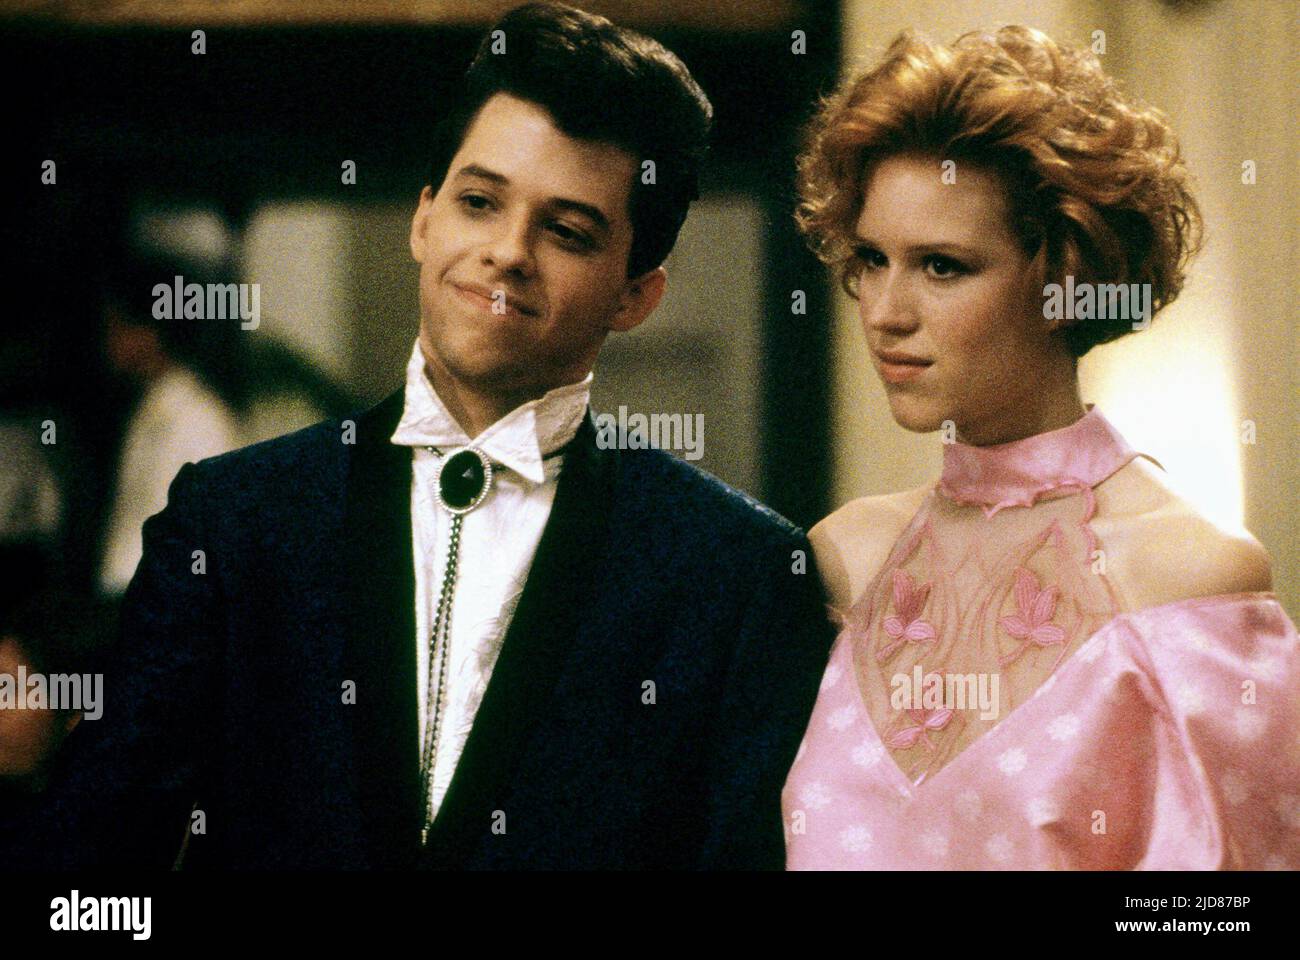 CRYER,RINGWALD, PRETTY IN PINK, 1986, Stock Photo